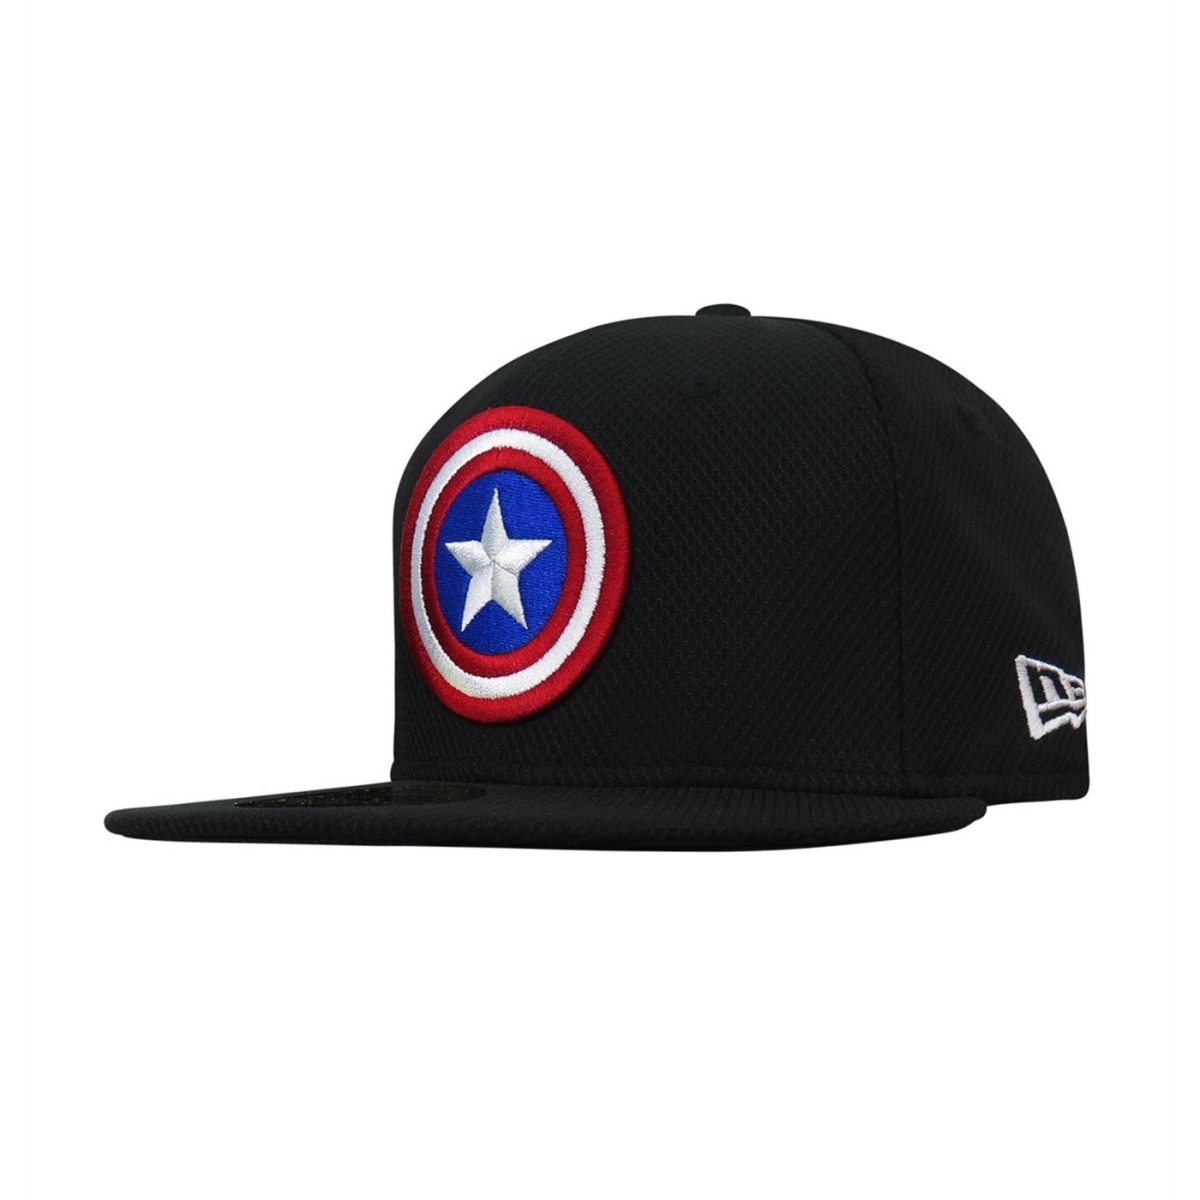 Picture of Captain America hatcapshldsym5950-734-7 3-4 Fitted Captain America Shield Black 59Fifty Fitted Hat - Size 7.75